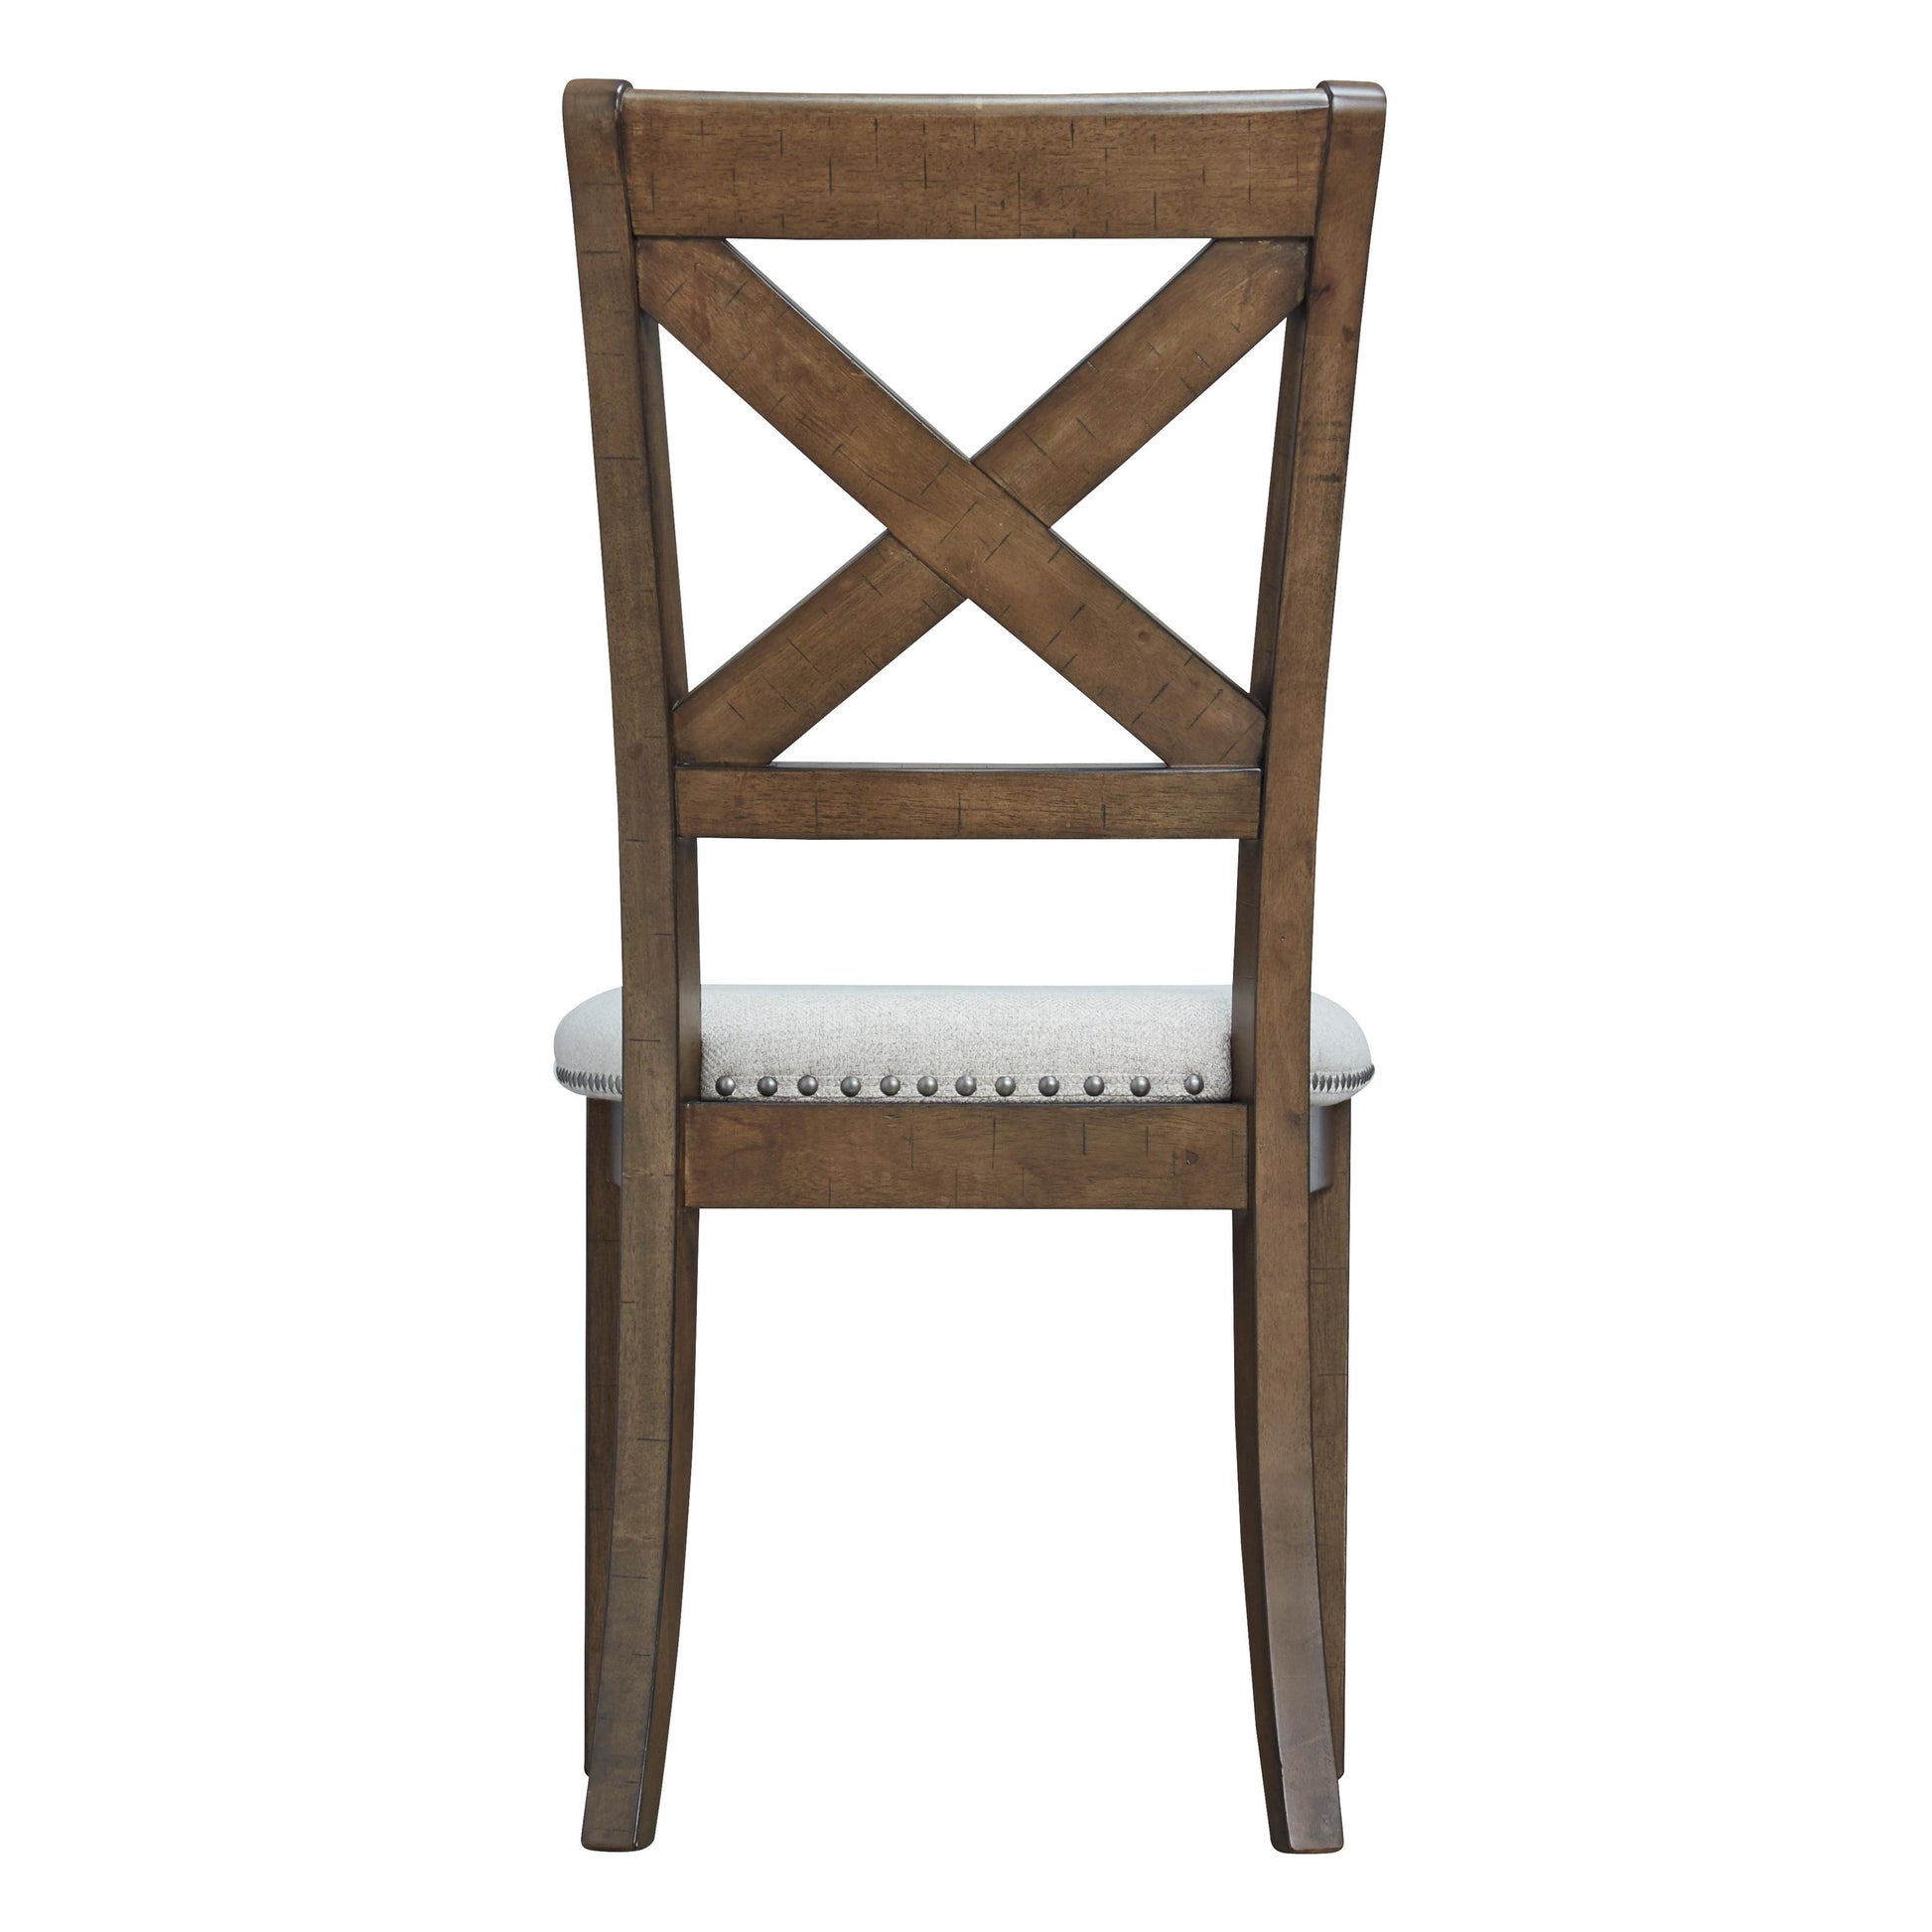 Signature Design by Ashley Moriville Dining Chair D631-01